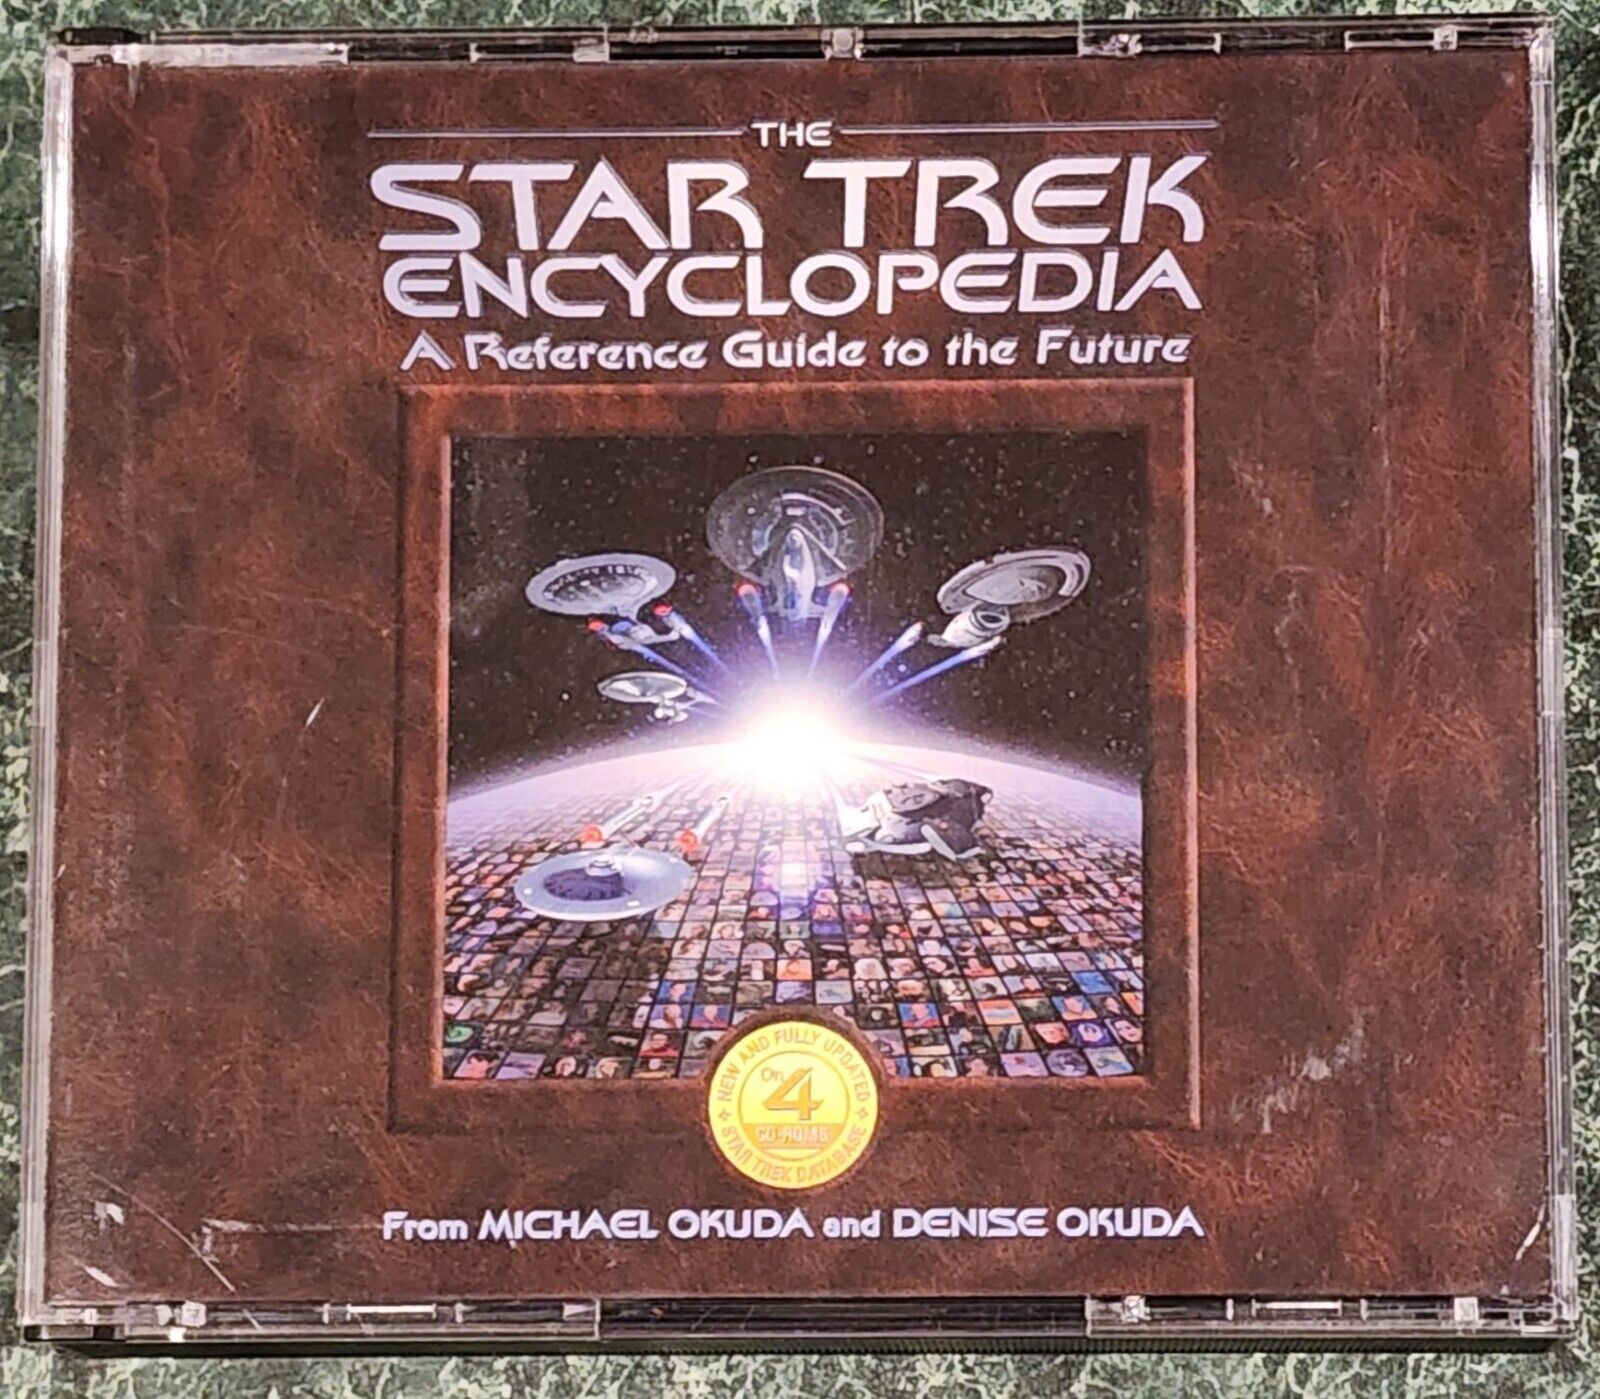 The Star Trek Encyclopedia - A Reference Guide to the Future (Windows 95 / Mac)